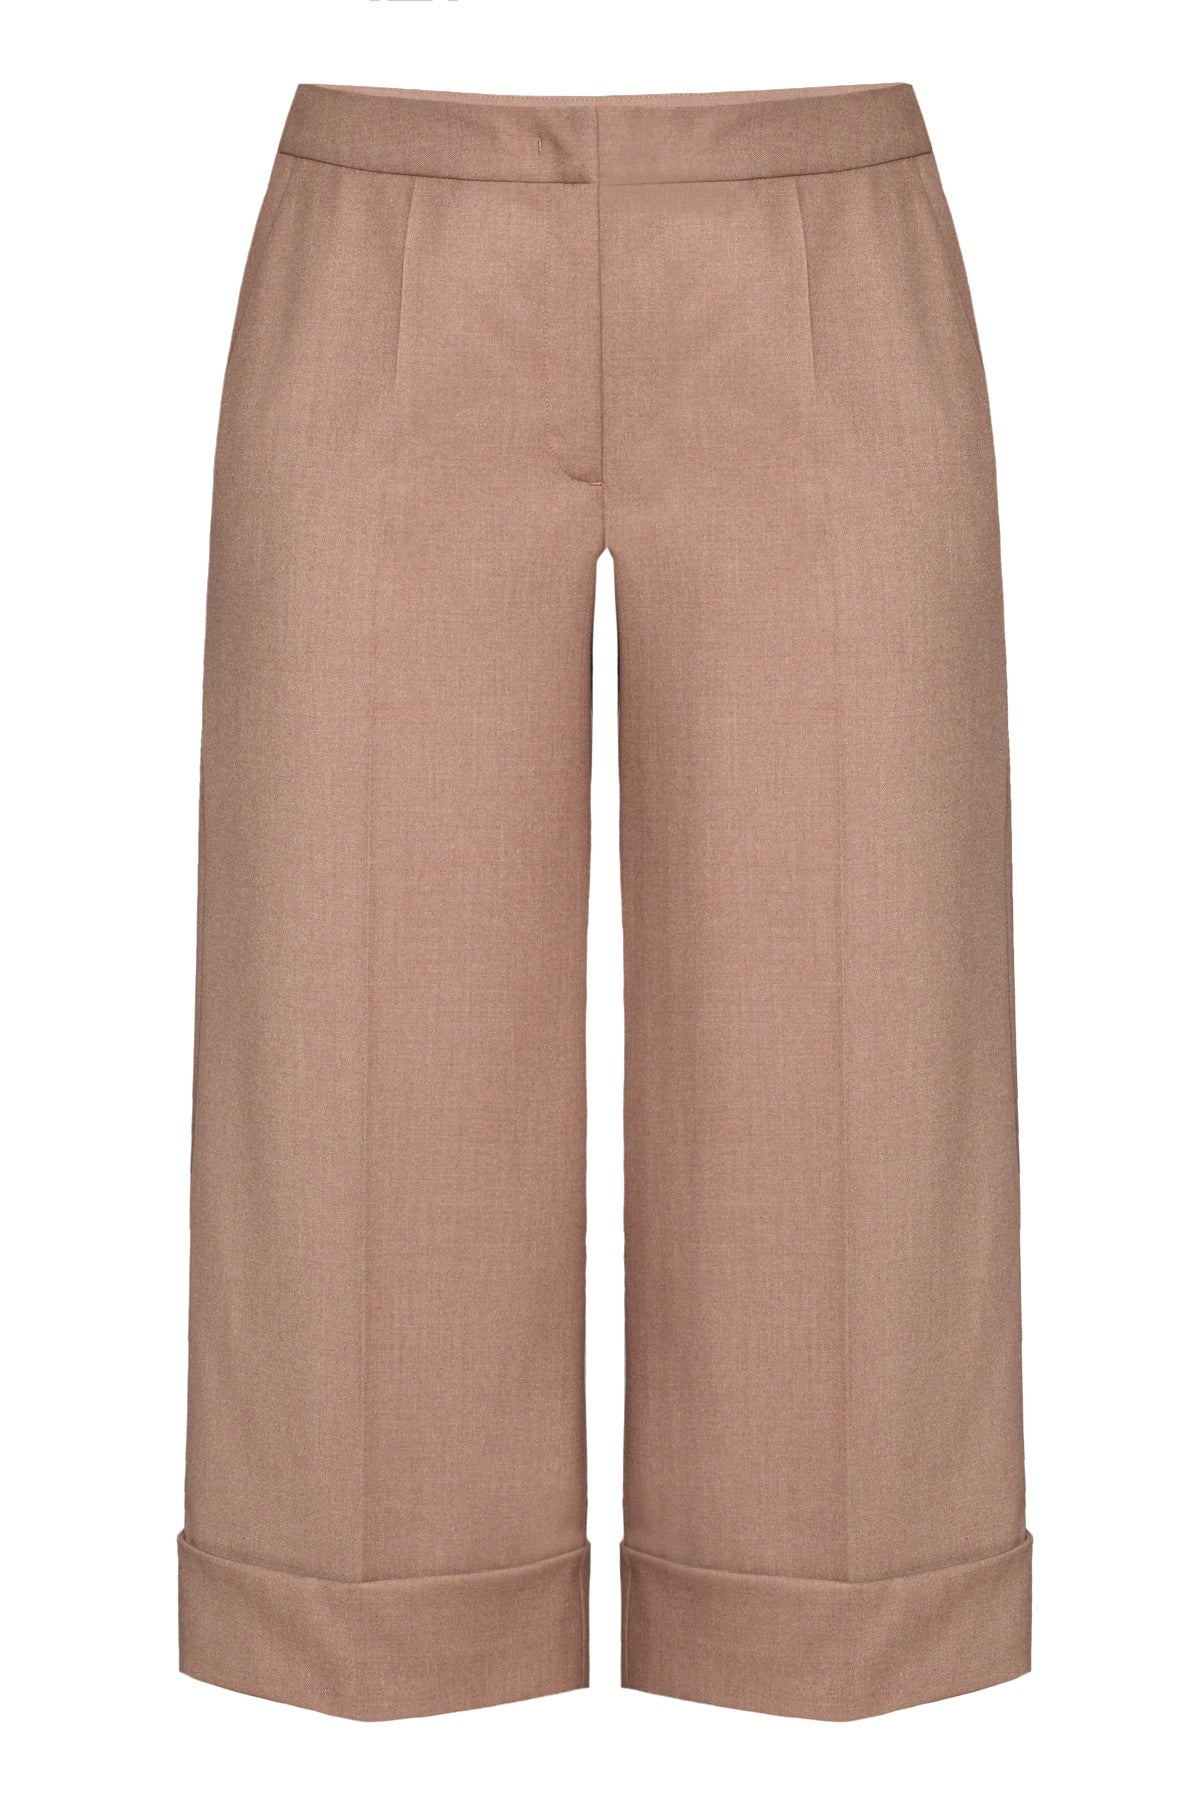 CROPPED MODERN TROUSERS IN CAMEL